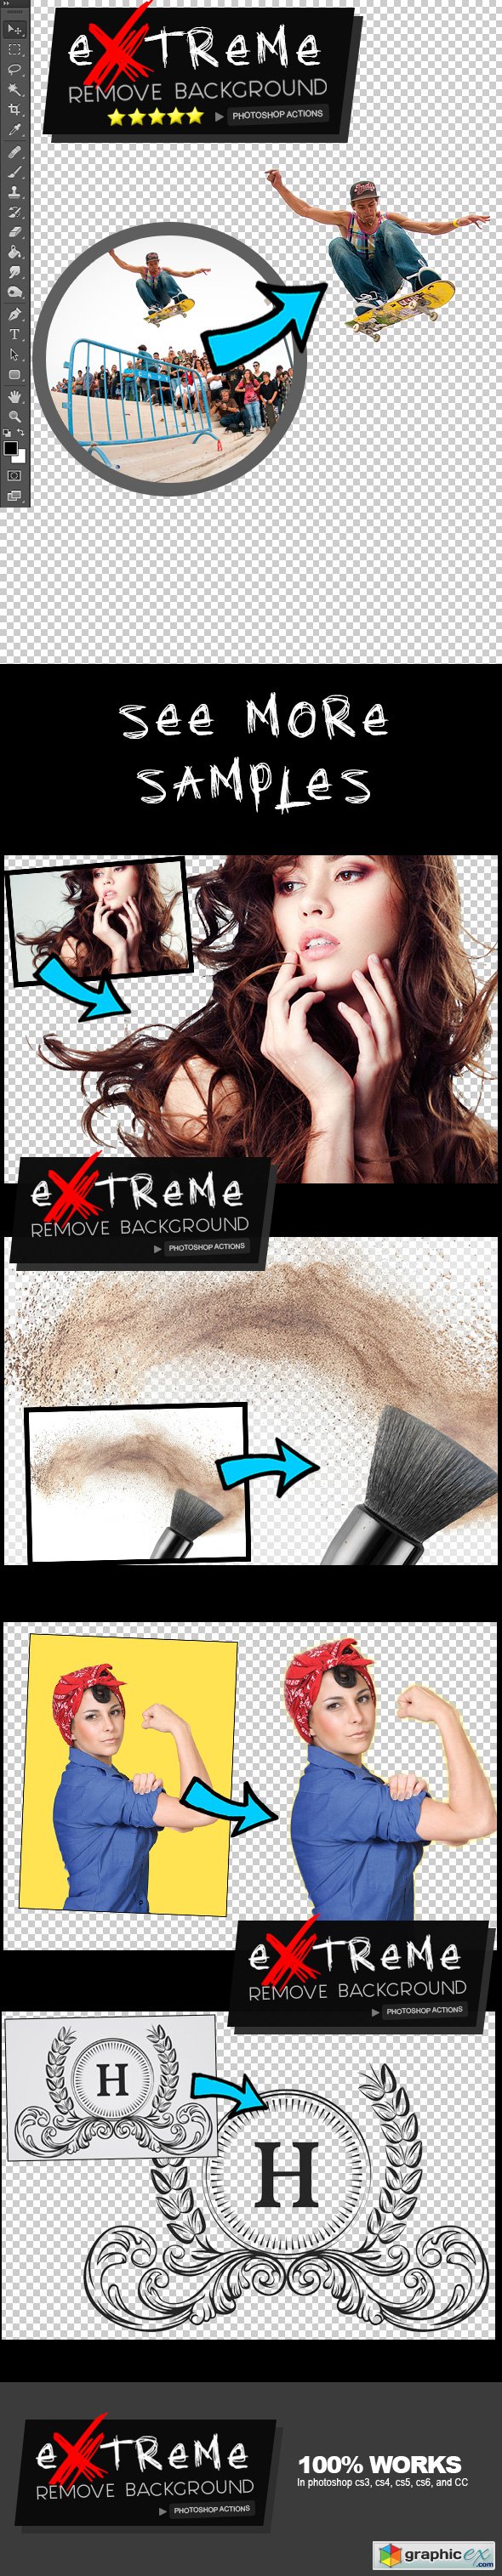 Extreme Remove Background Photoshop Actions